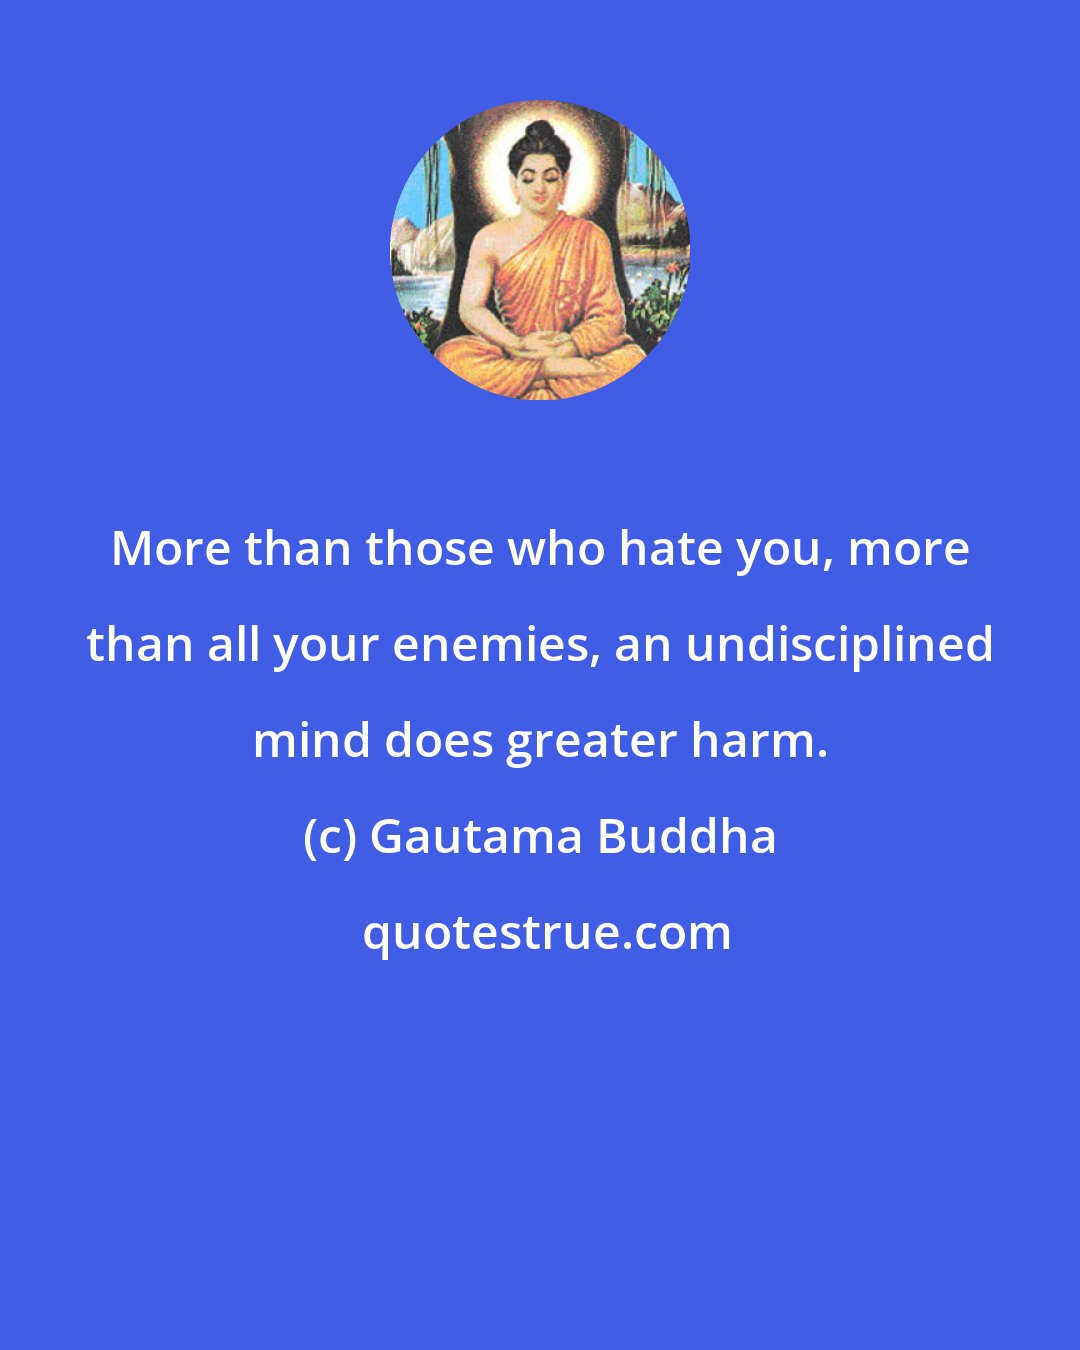 Gautama Buddha: More than those who hate you, more than all your enemies, an undisciplined mind does greater harm.